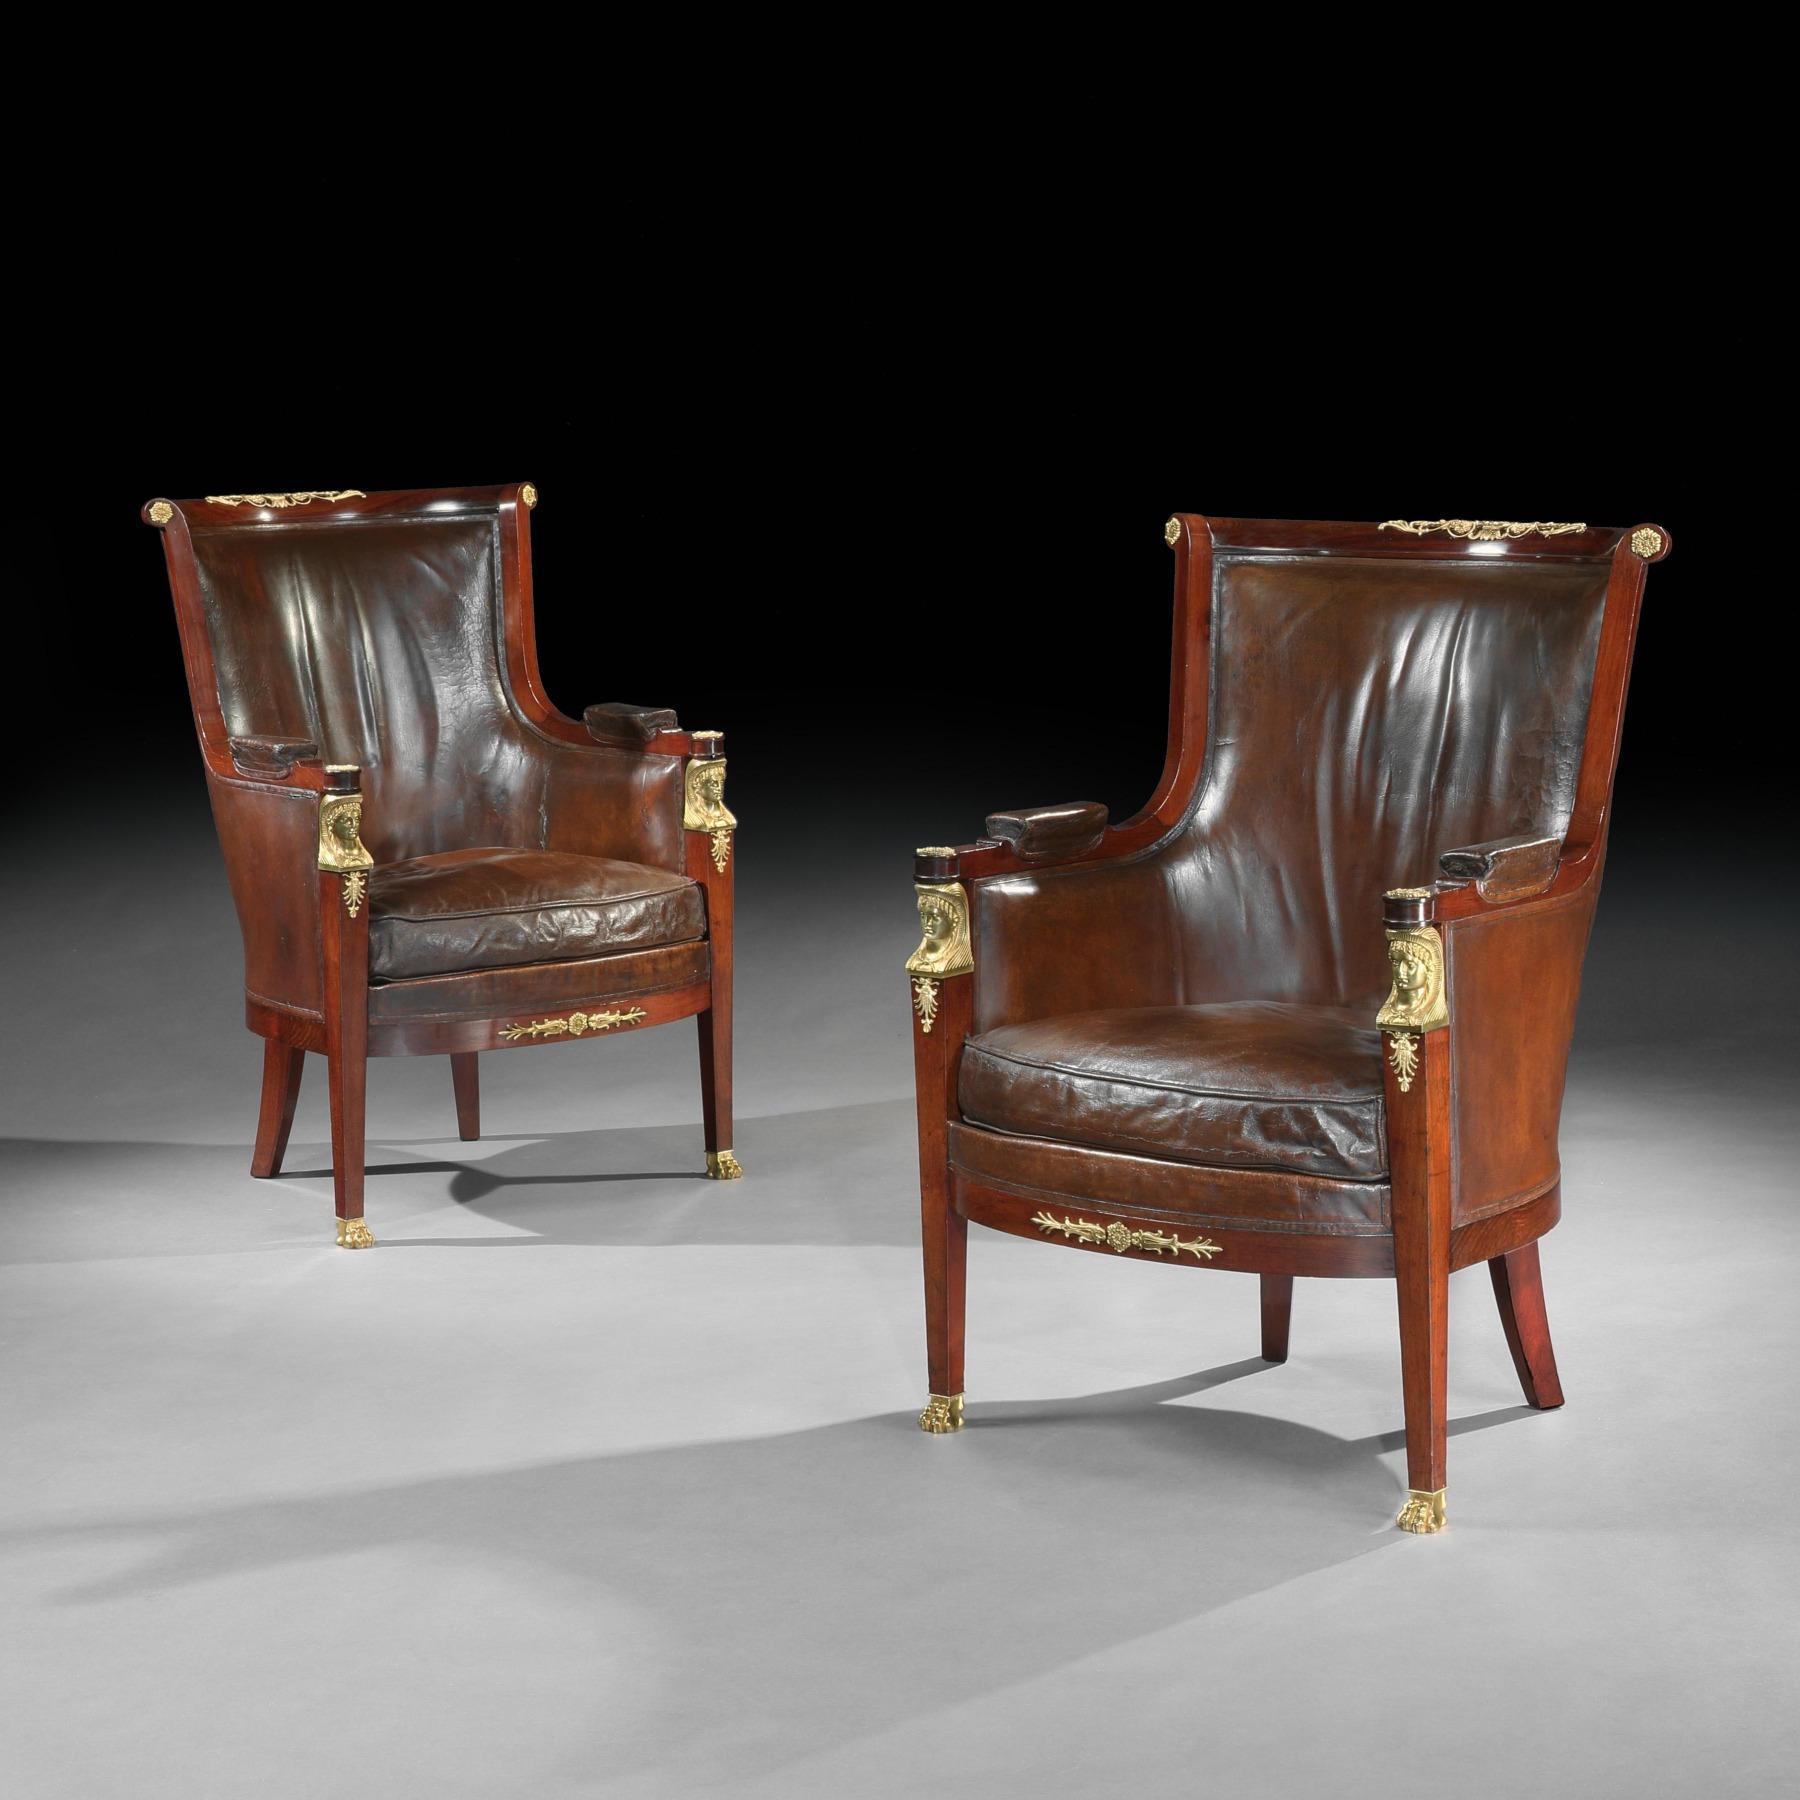 French Pair of 19th Century Gilt Bronze-Mounted Moroccan Leathered Armchairs For Sale